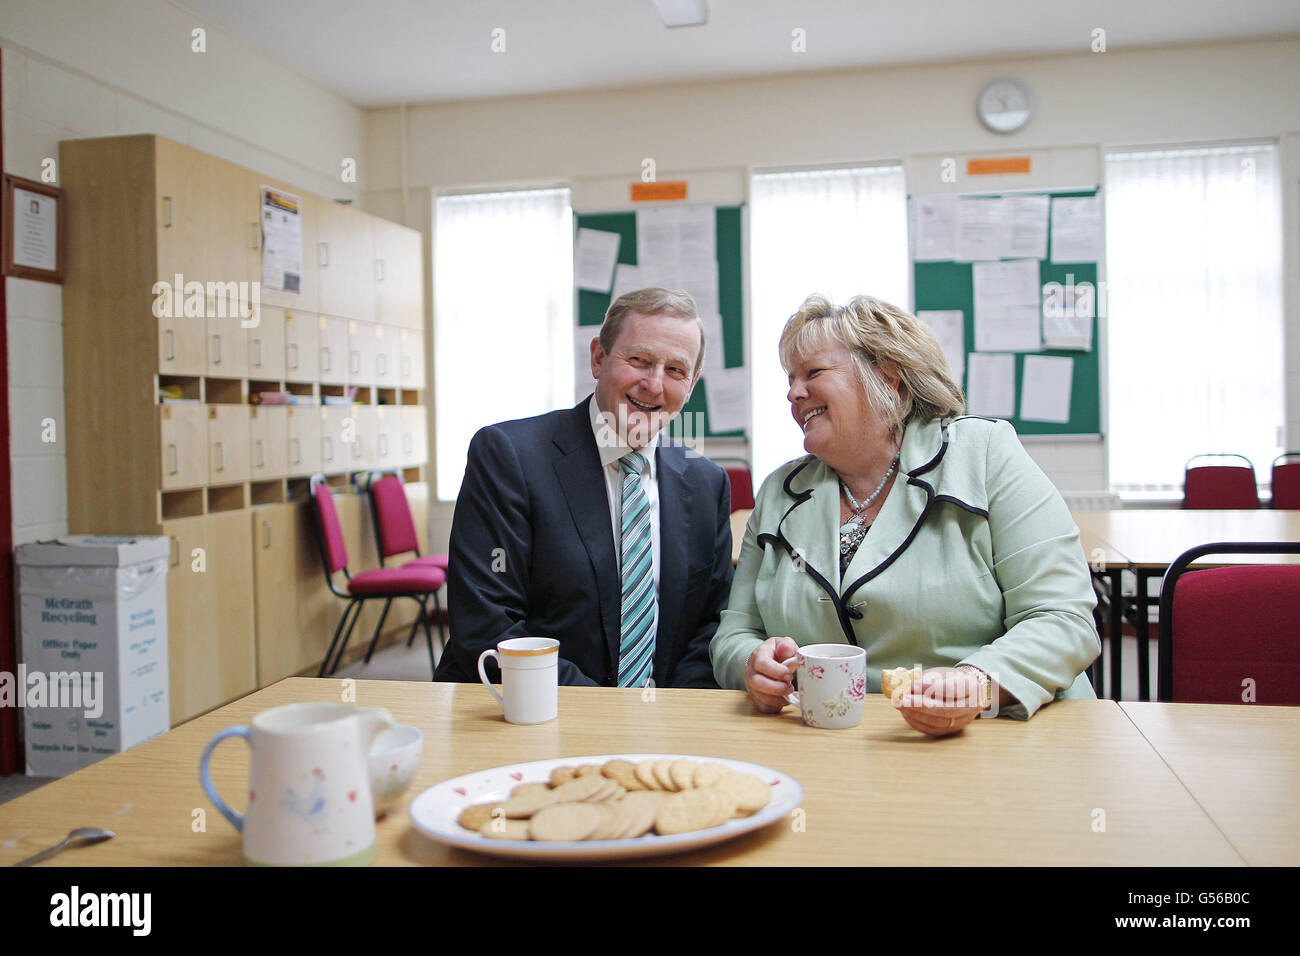 Taoiseach Enda Kenny and his wife Fionnuala enjoy a cup of tea in the staff room after casting their votes at St. Patrick's De La Salle Boys National School, Castlebar, Co. Mayo in the European Fiscal Treaty Referendum. Stock Photo